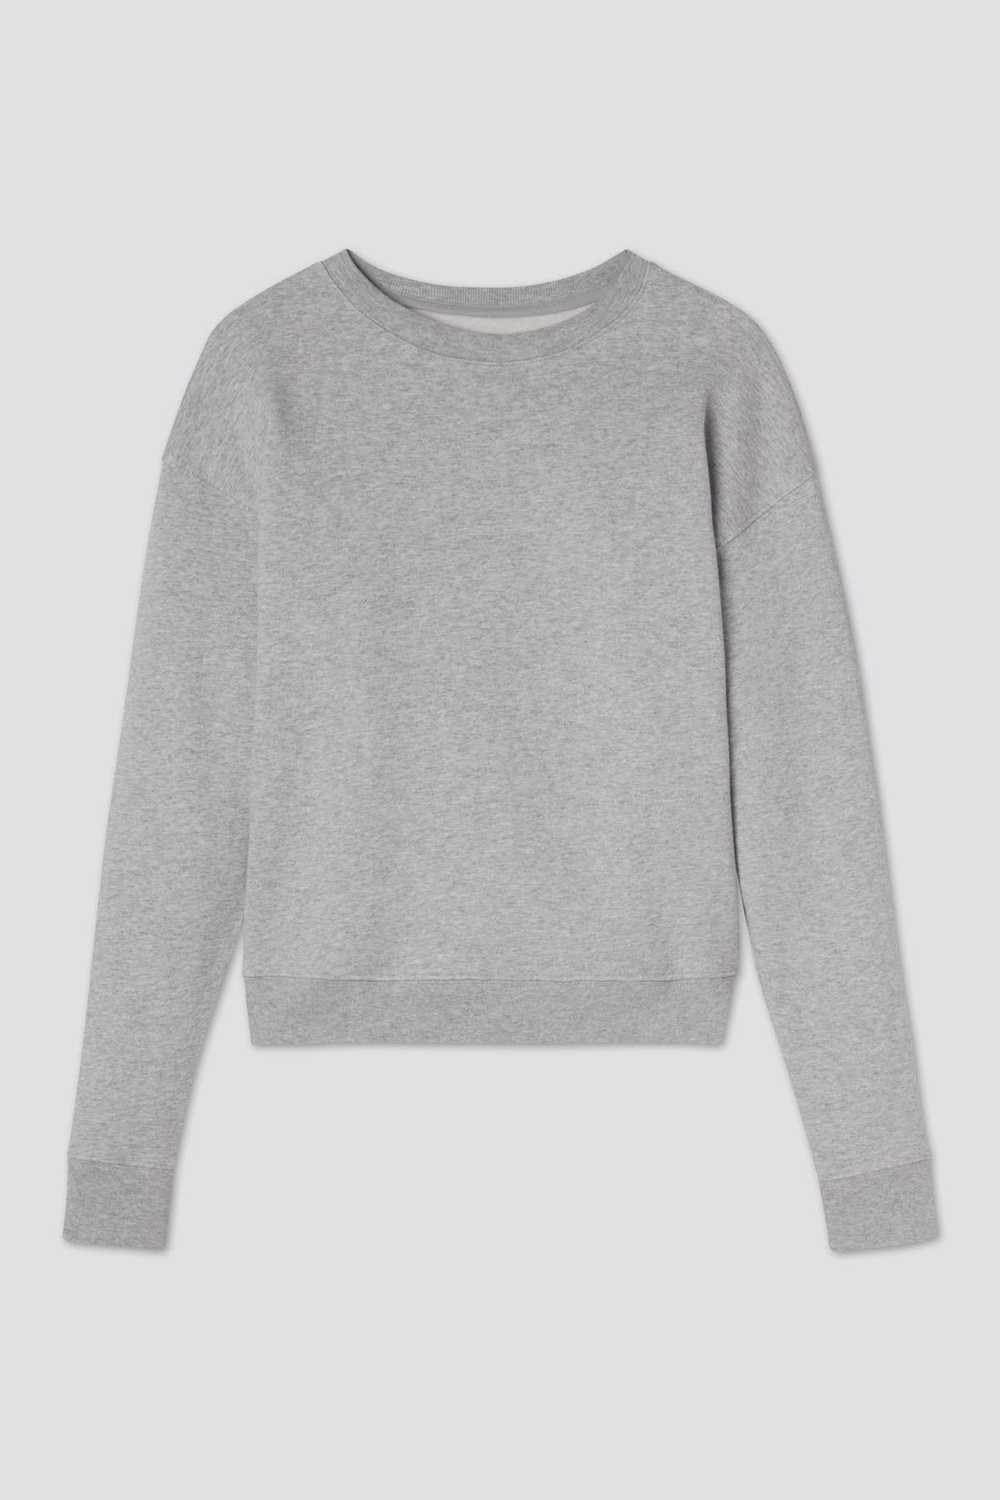 Girlfriend Collective Heather Grey 50/50 Classic … - image 4